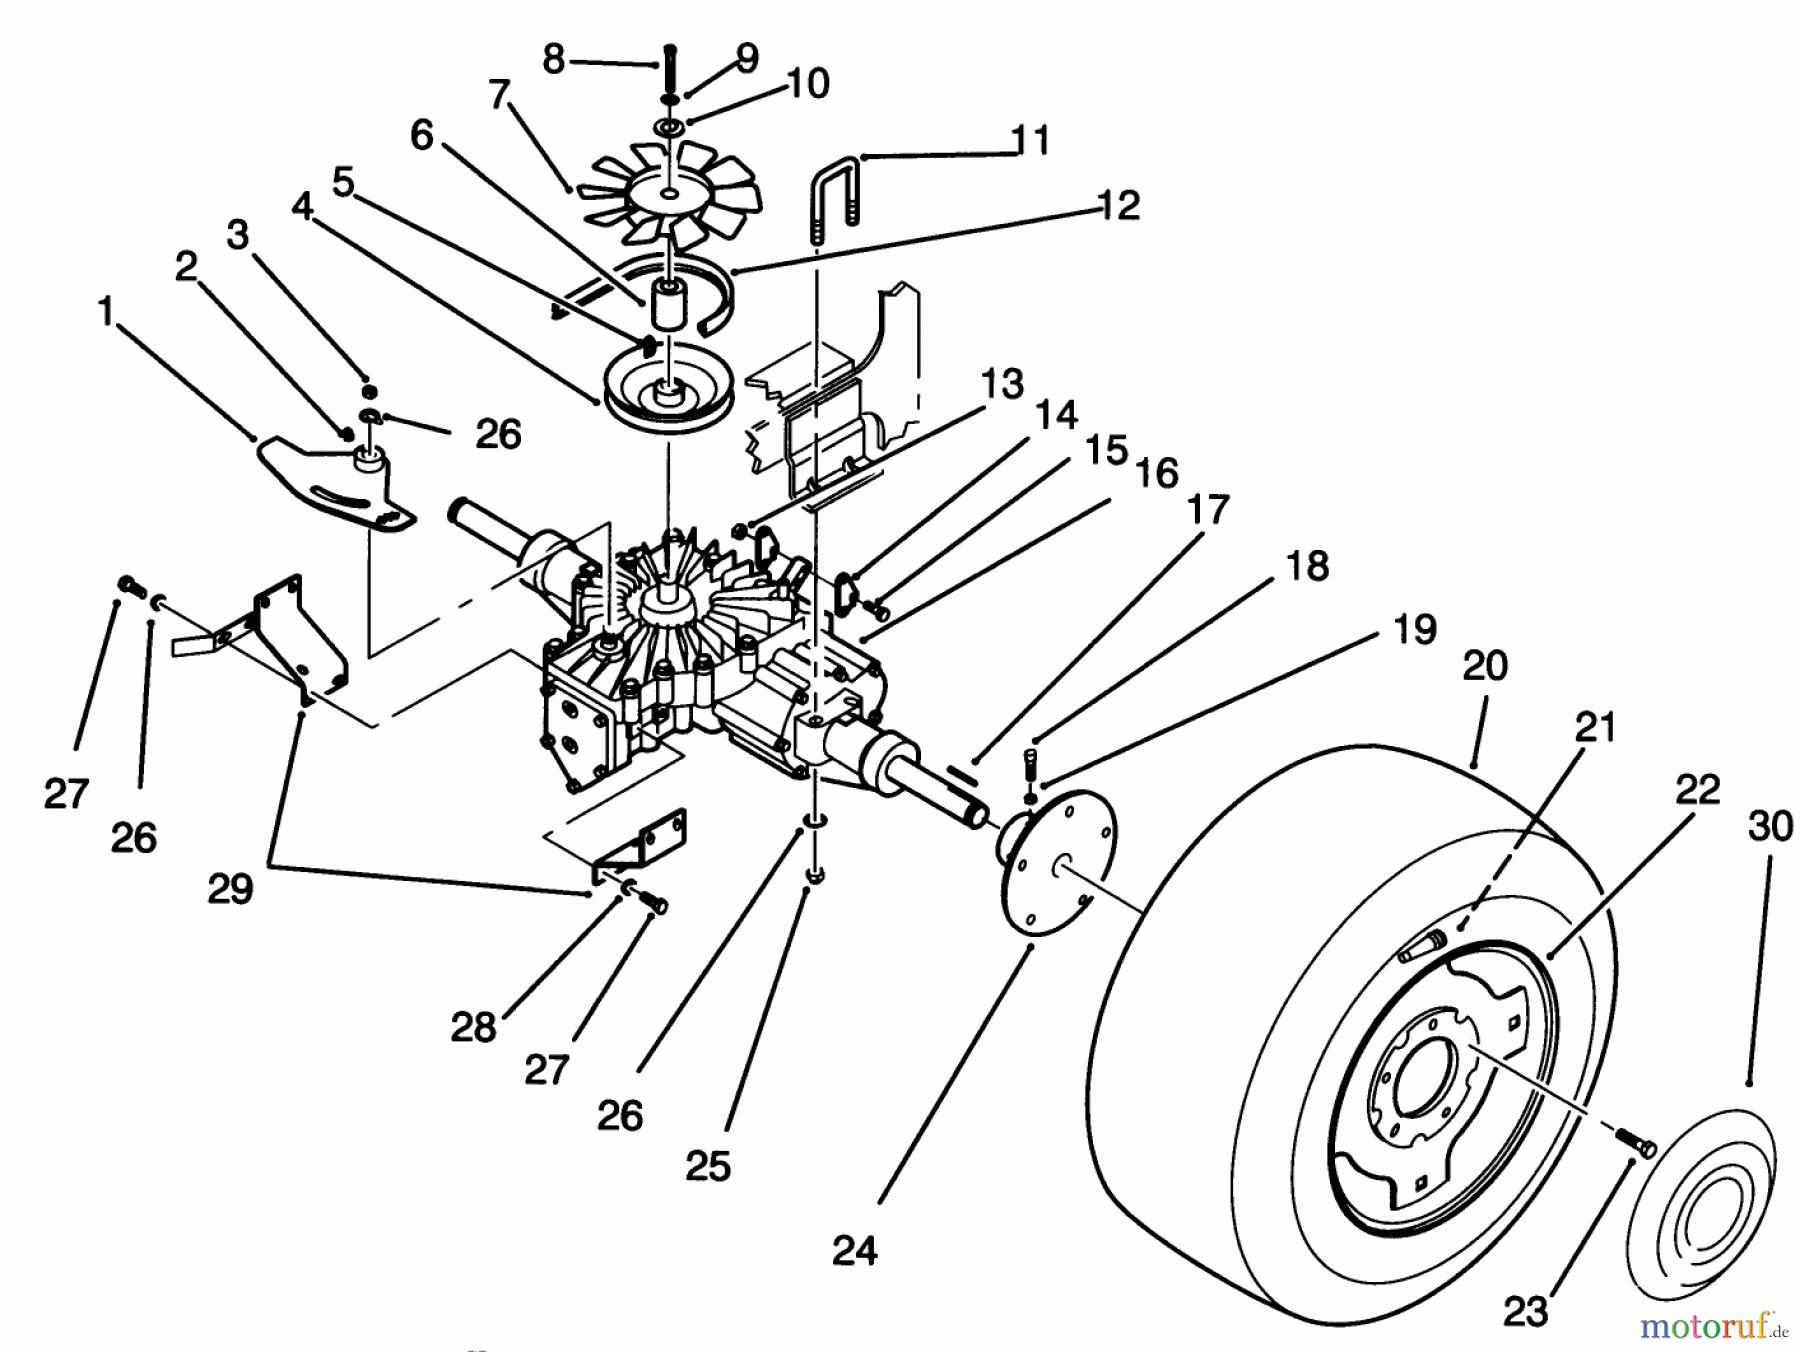  Toro Neu Mowers, Lawn & Garden Tractor Seite 1 72101 (246-H) - Toro 246-H Yard Tractor, 1993 (3900001-3999999) REAR WHEEL AND TRANSMISSION ASSEMBLY